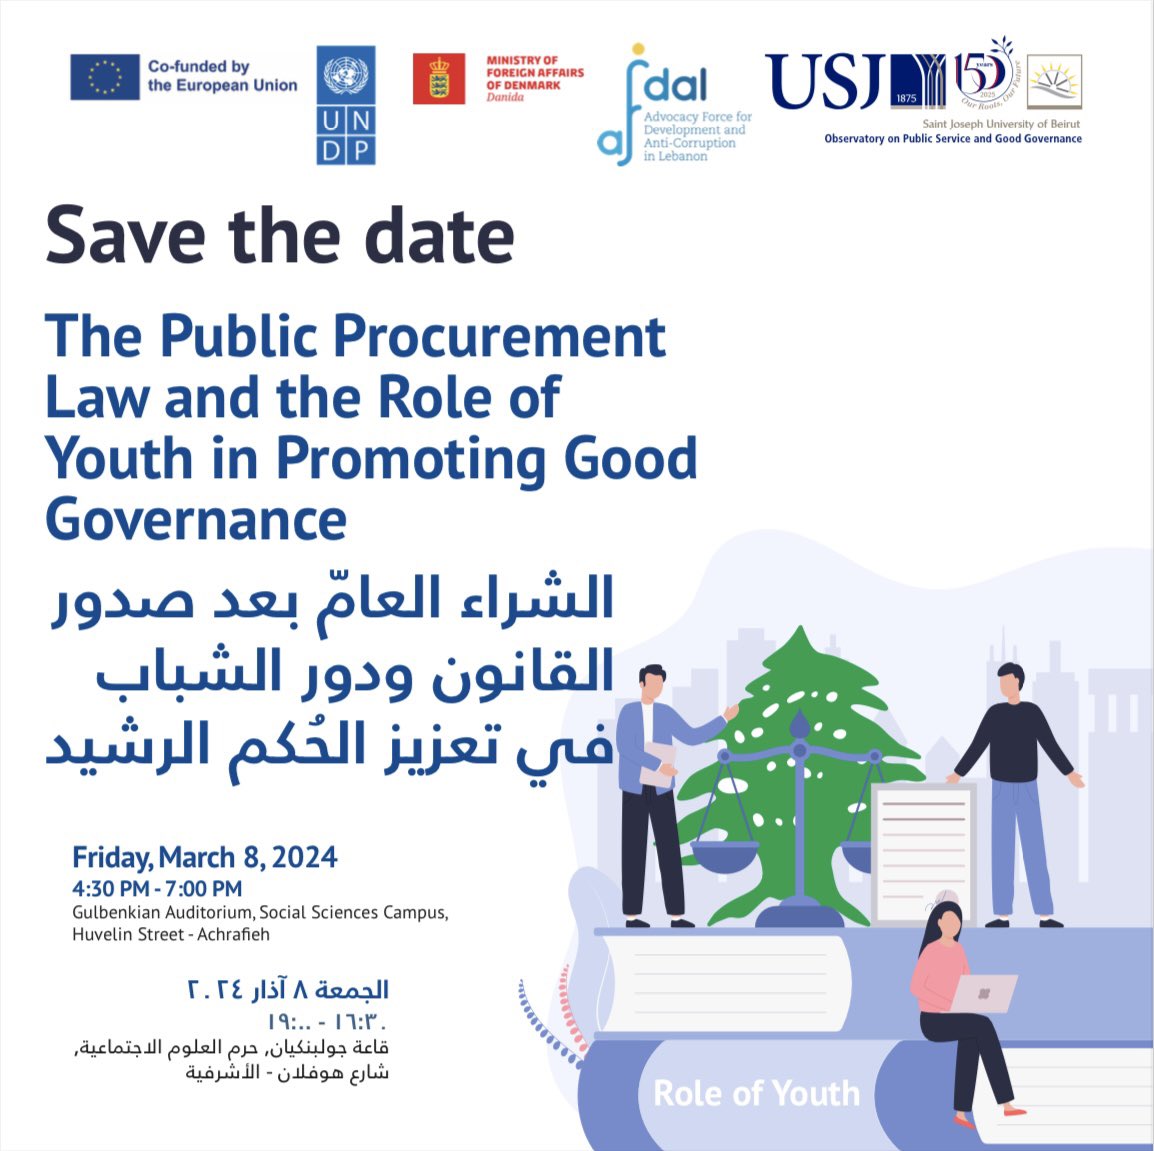 “ The Public Procurement Law and the Role of Youth in Promoting Good Governance ” 🗓️ Friday March 8, 2024 ⏰ 4:30 PM - 7:00 PM 📌 Gulbenkian Auditorium, Social Sciences Campus, Huvelin Street - Achrafieh @USJLiban @pascalmonin @afdallebanon